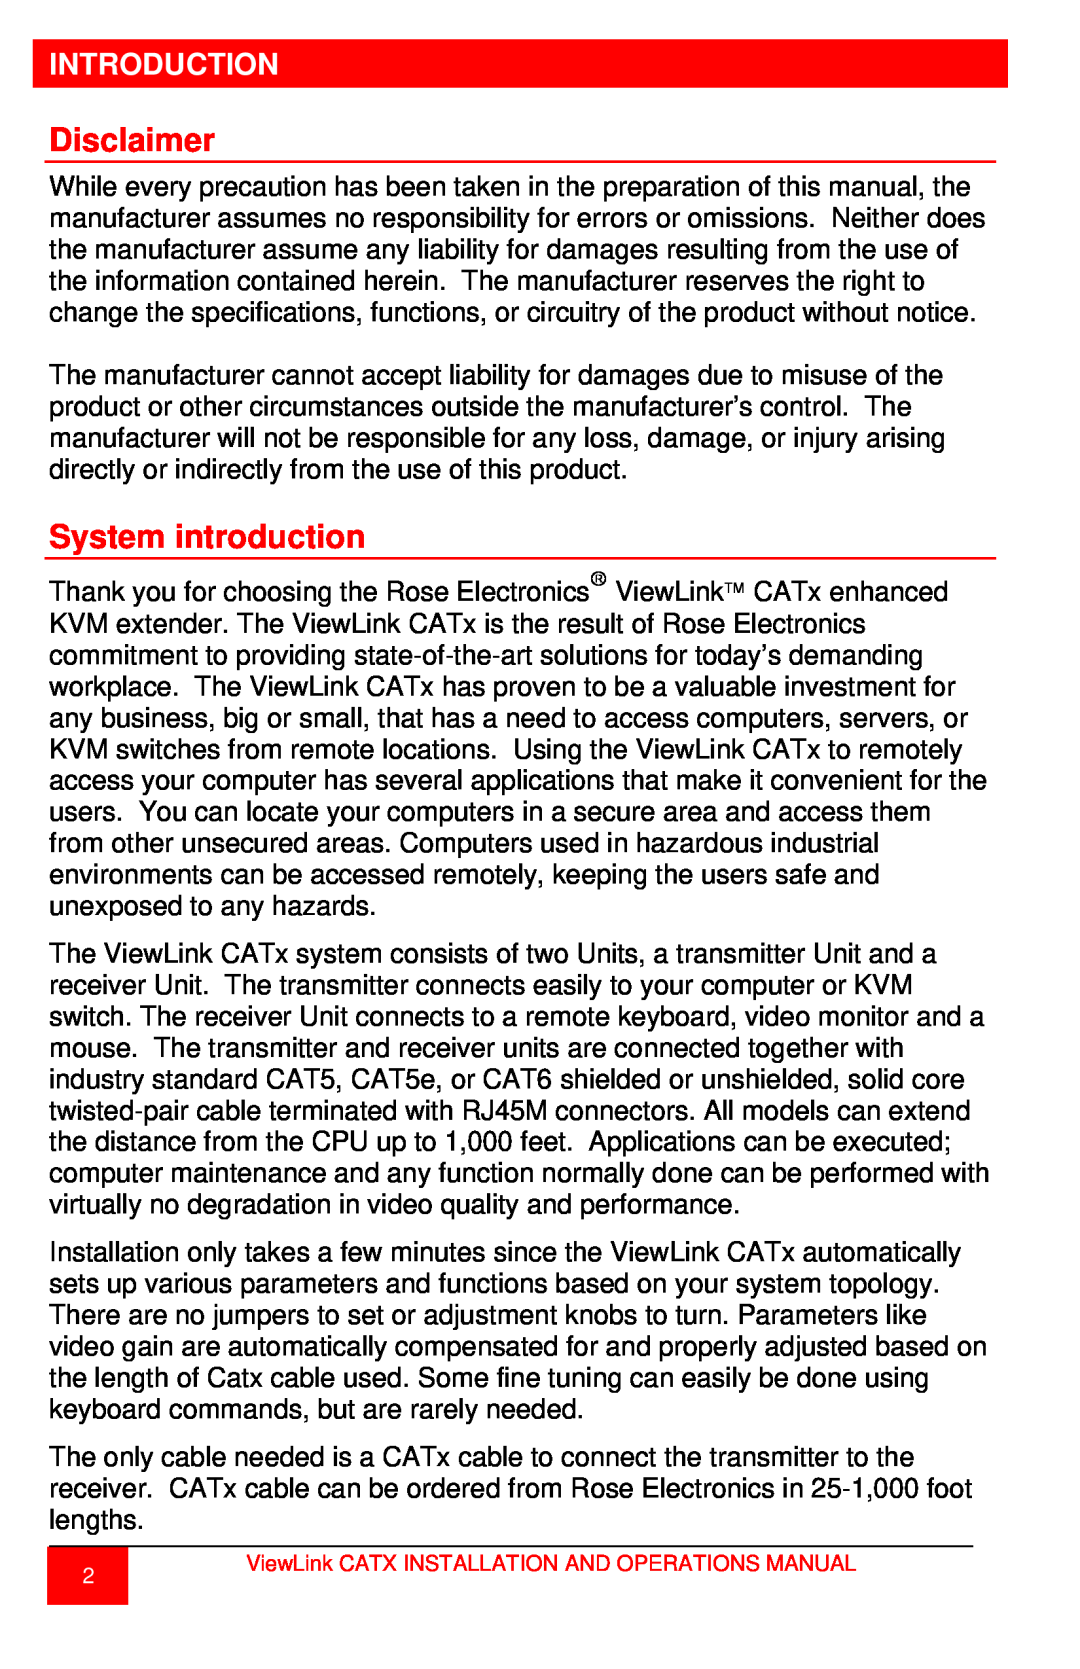 Rose electronic CATx manual Disclaimer, System introduction, Introduction 